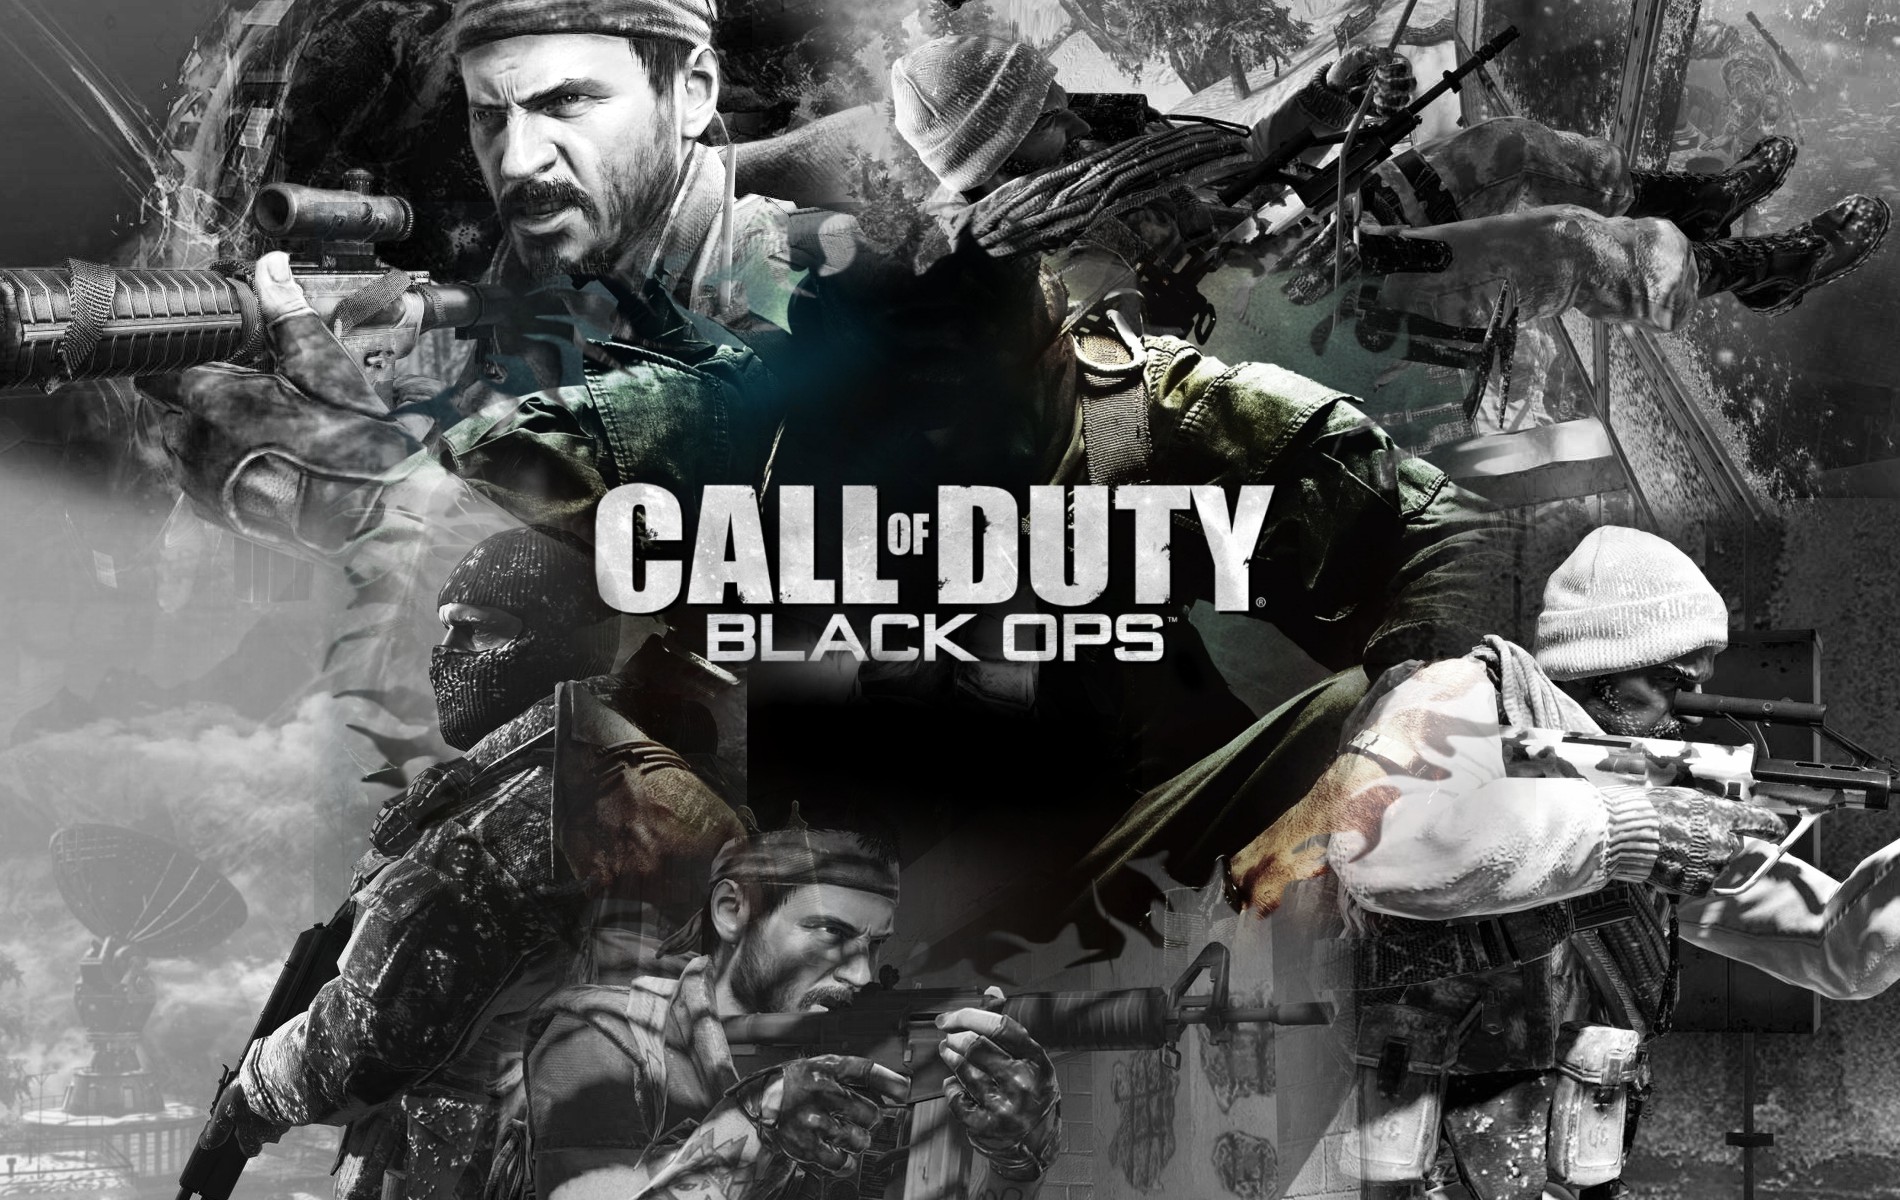 Call Of Duty Black Ops Wallpaper Pictures toon Pinterest